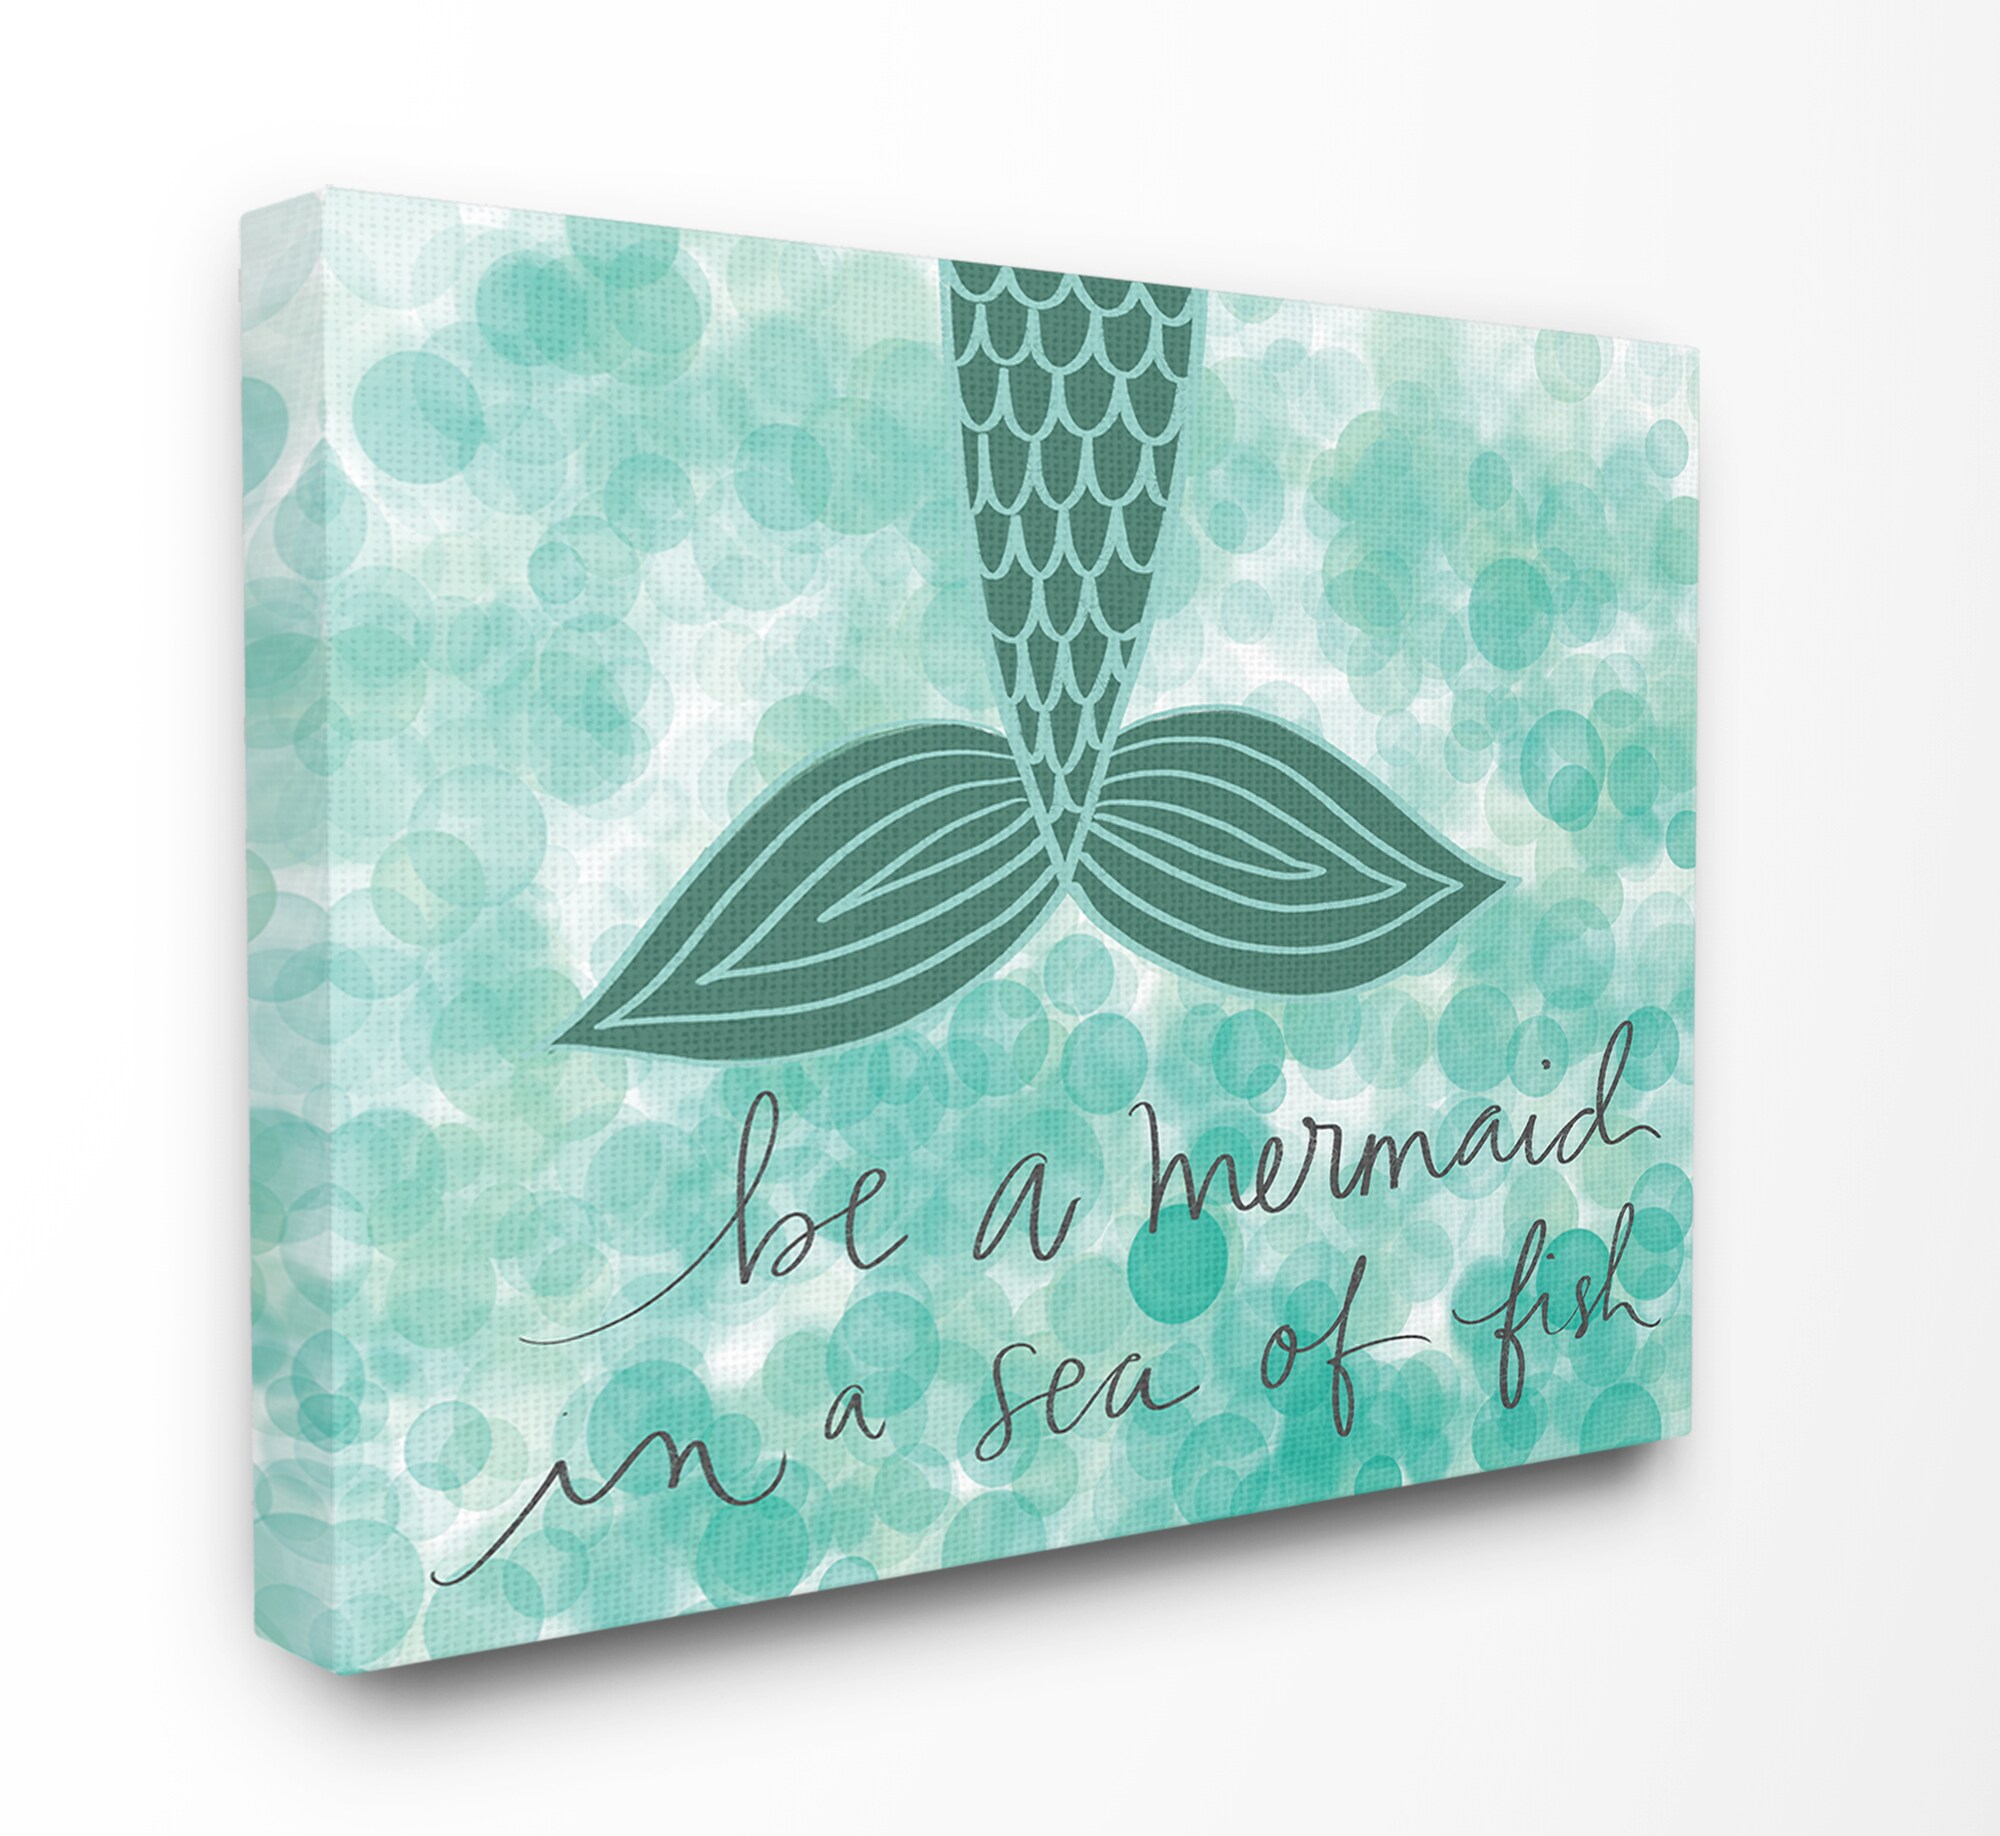 24 x 1.5 x 24 Proudly Made in USA Stupell Home Décor Mermaid or Live By the Sea Stretched Canvas Wall Art